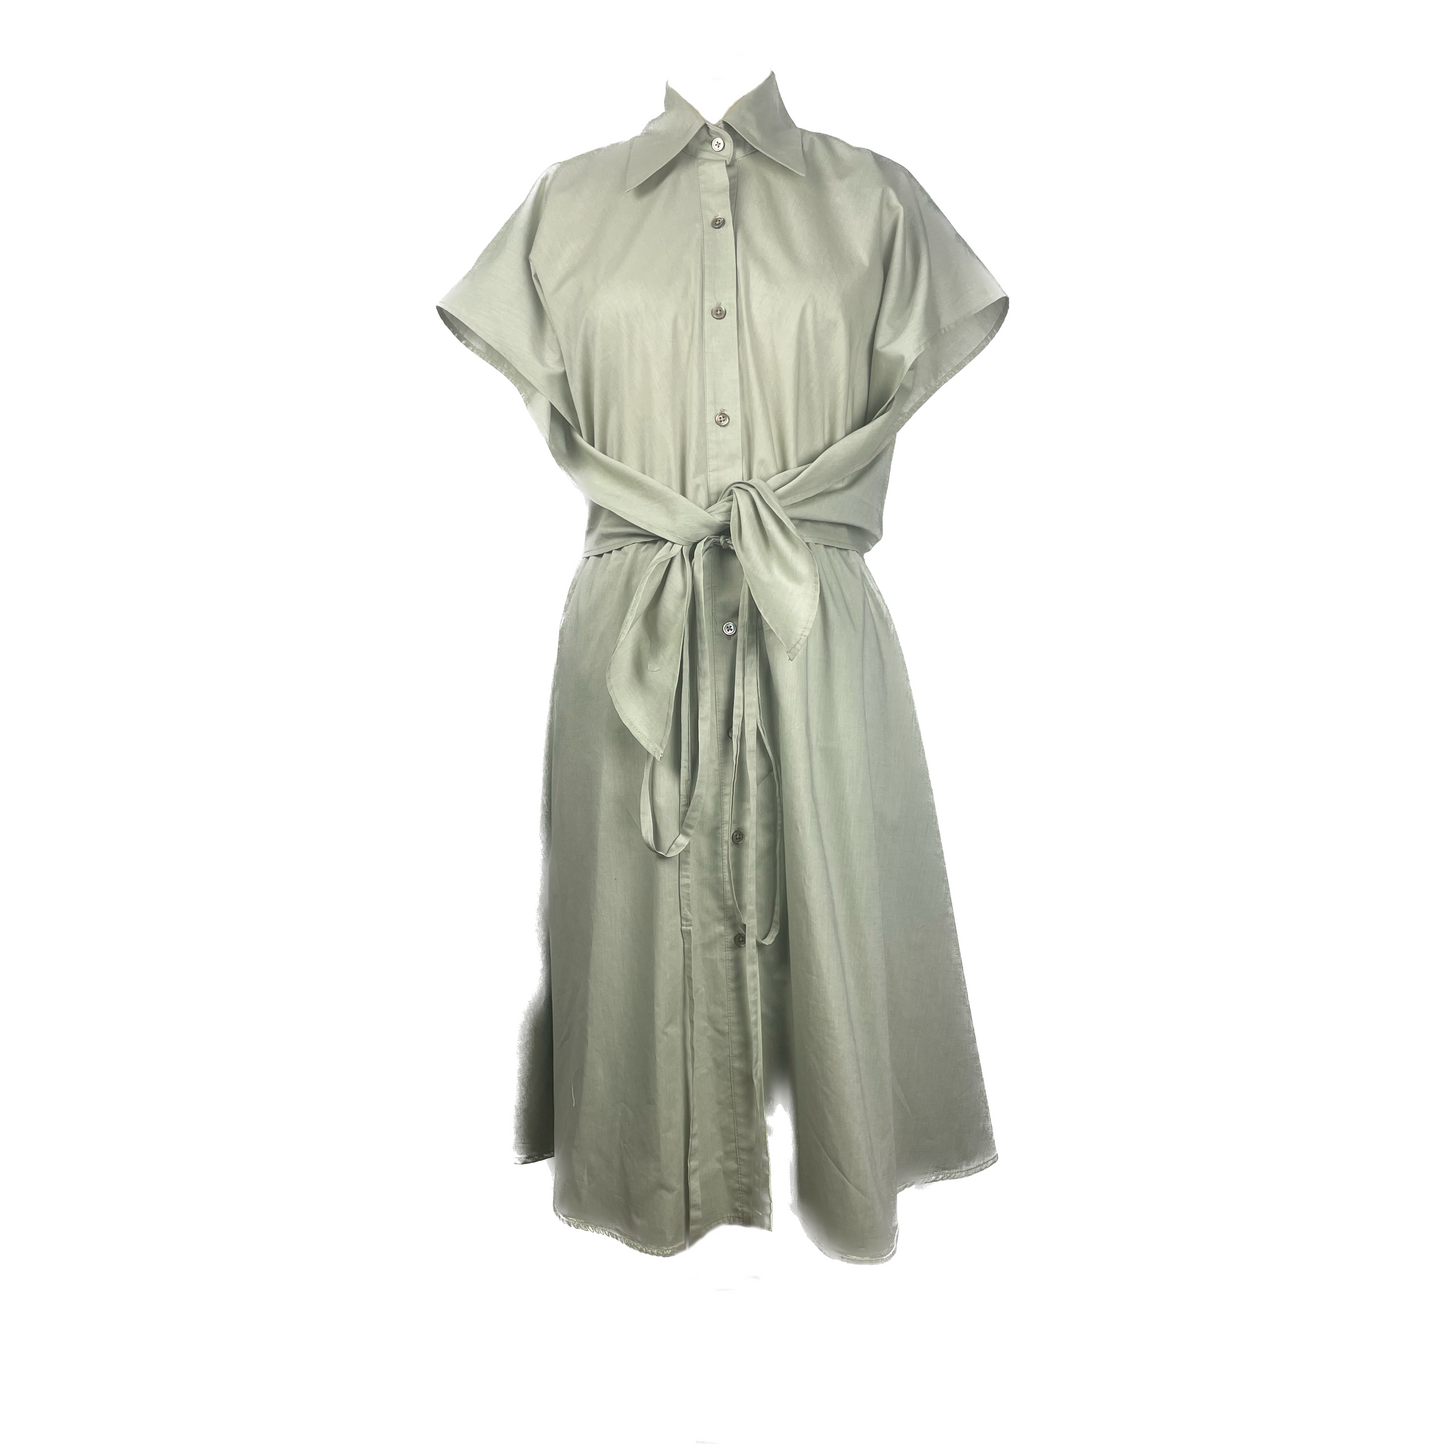 Cotton soft sage dress with button detailing and adjustable waist styled as belt